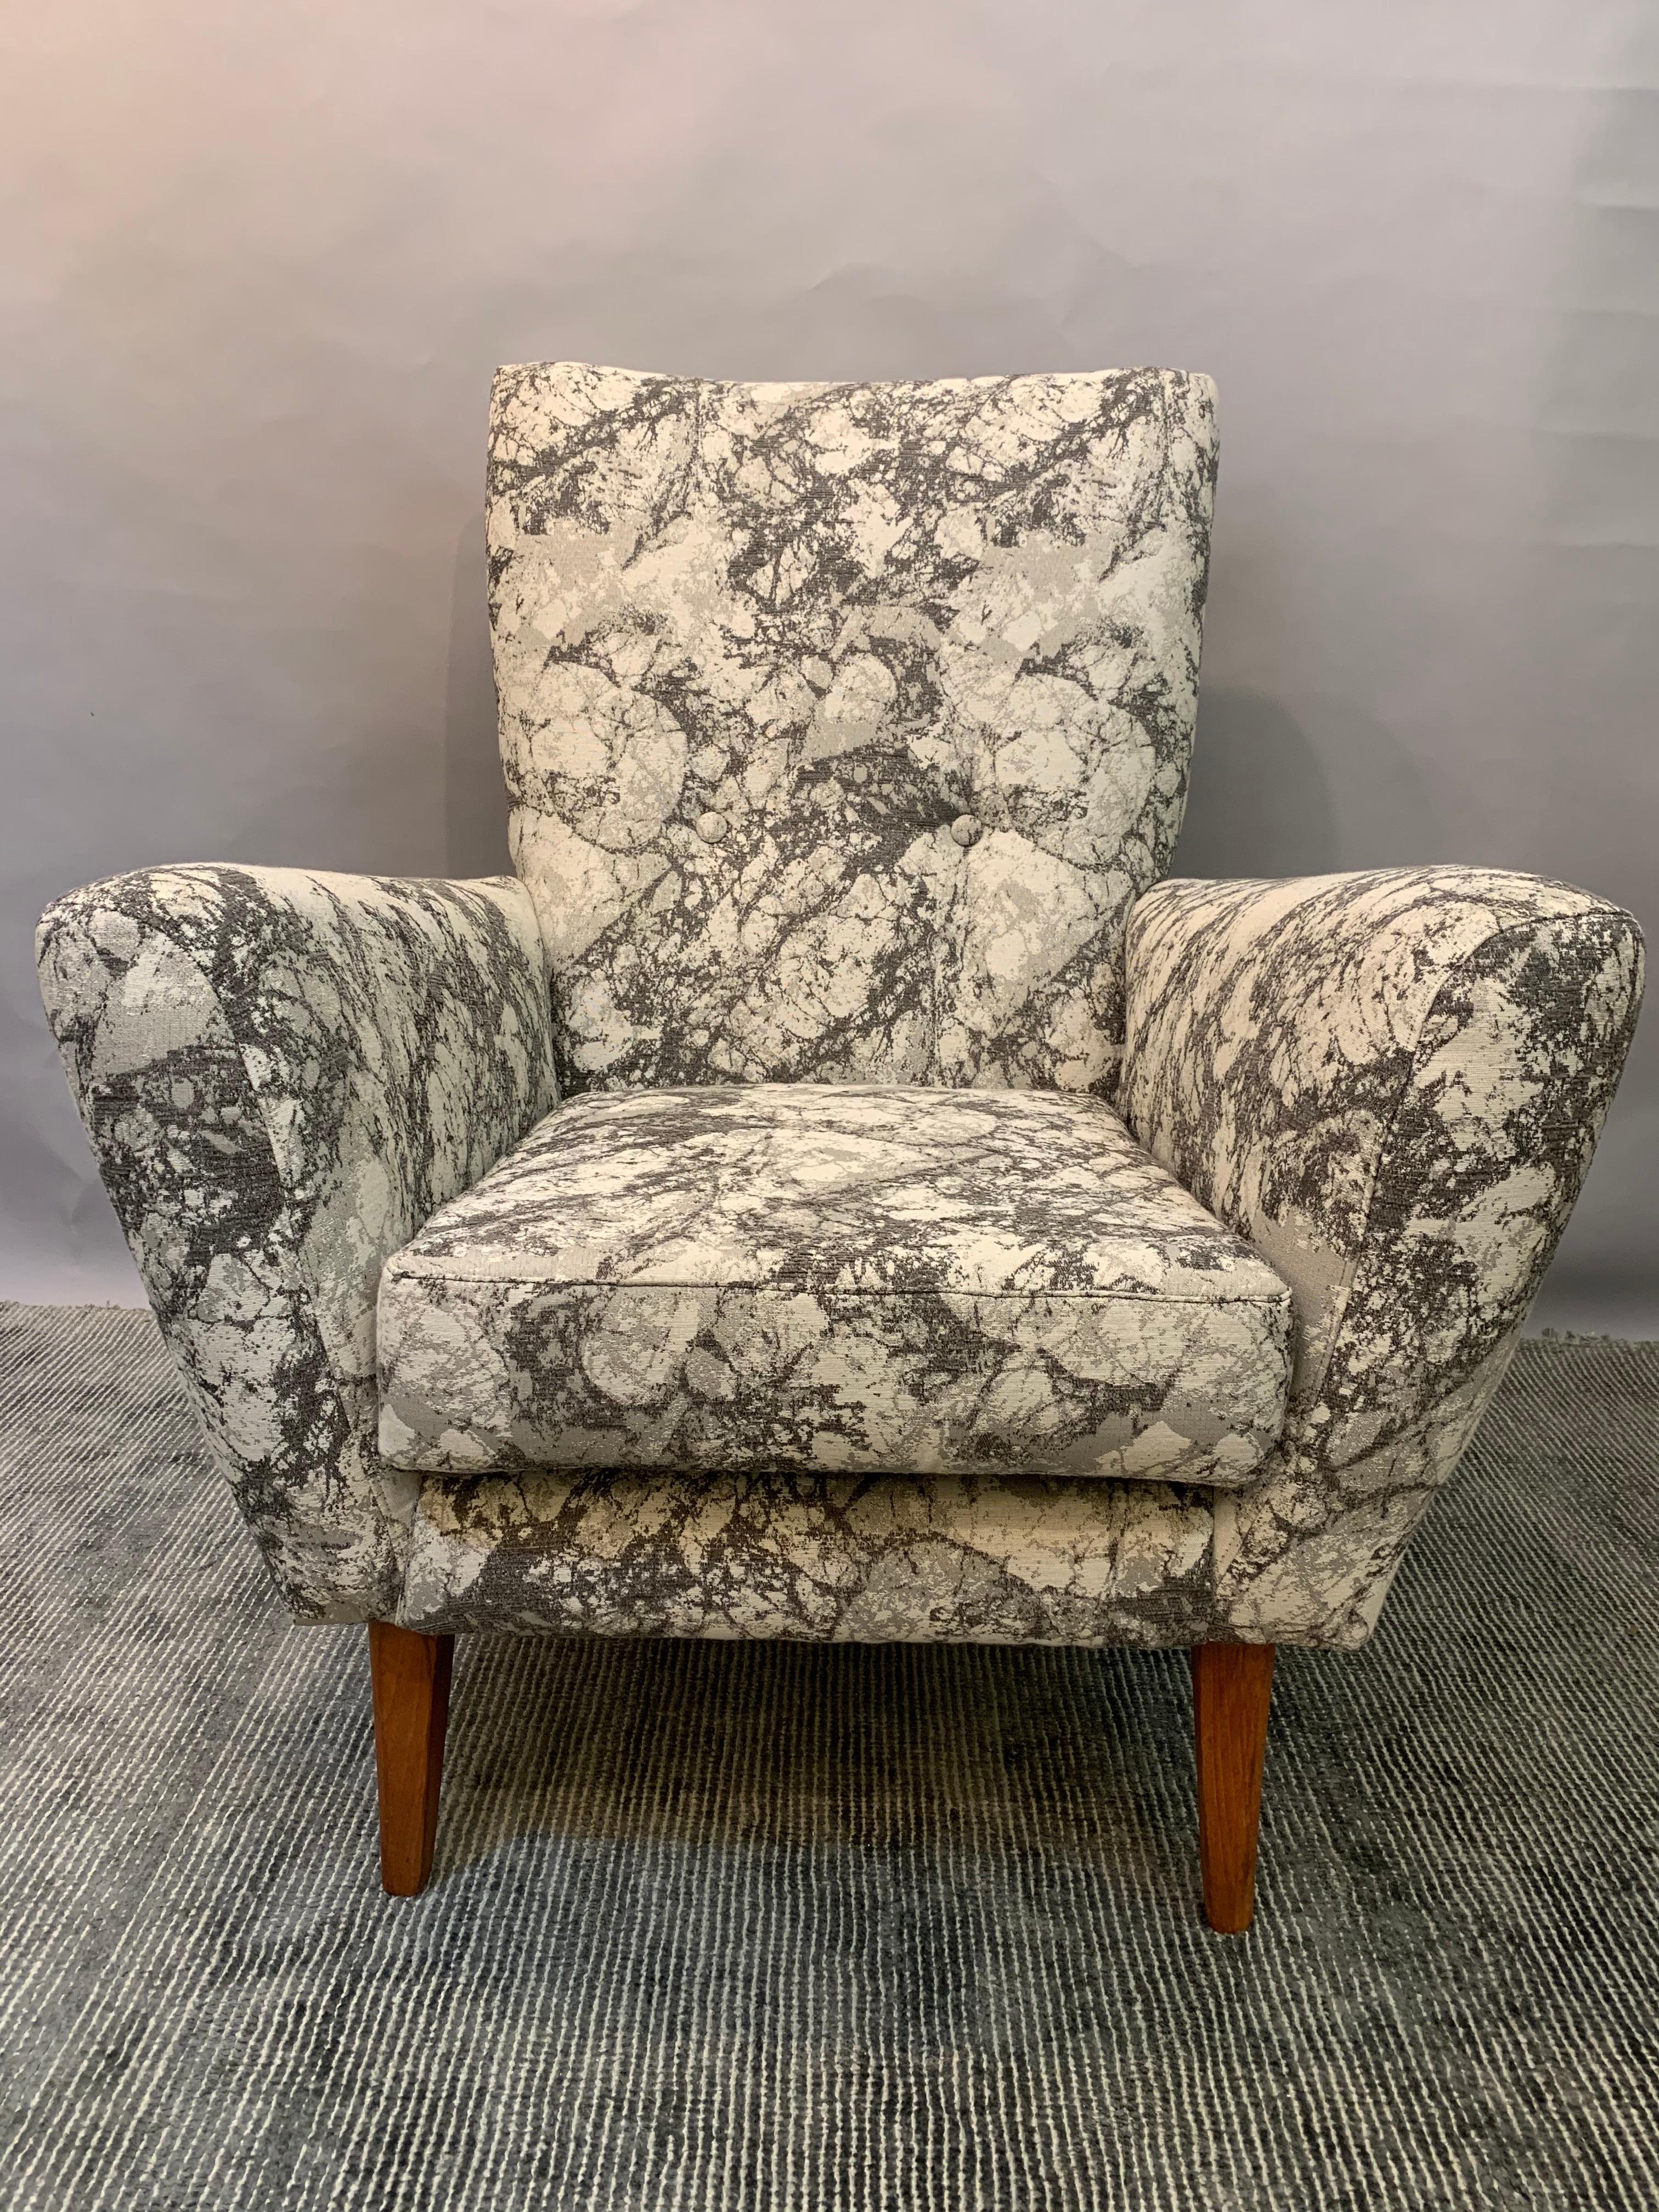 Mid-Century Modern 1950s British Made Armchair in Marble Effect Dark and Light Grey Fabric